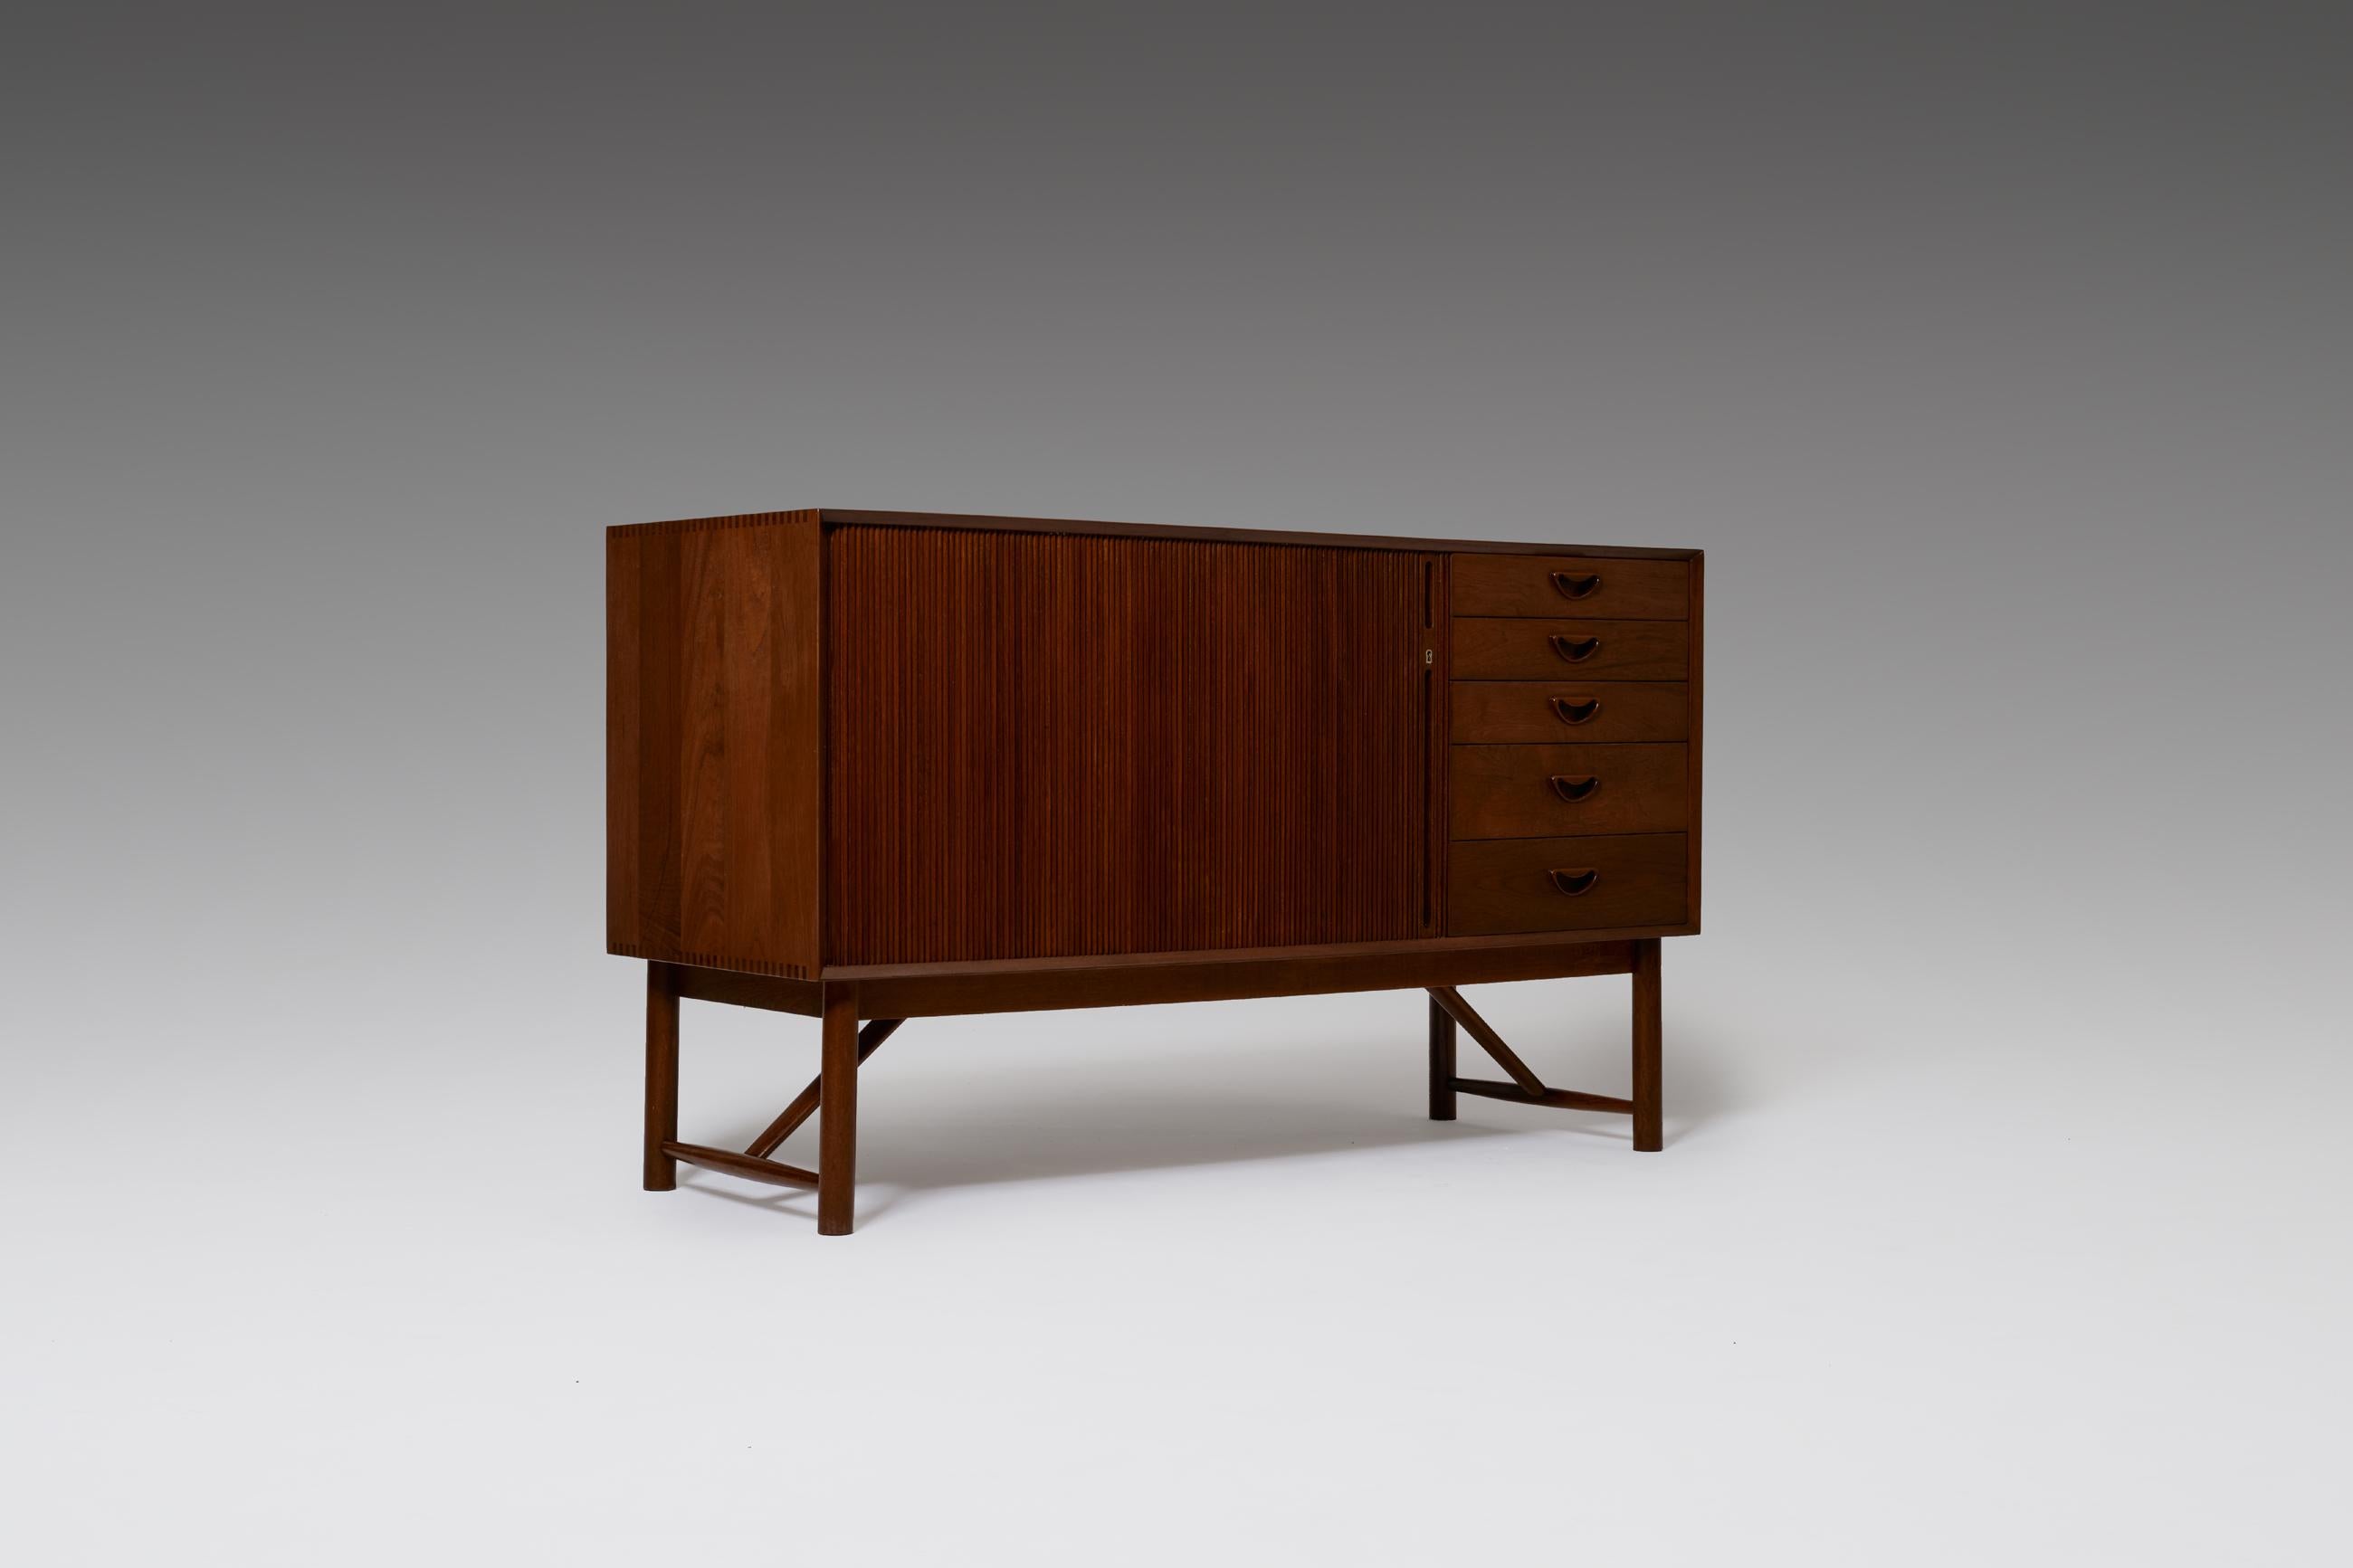 Scandinavian Modern credenza by Peter Hvidt and Orla Mølgaard-Nielsen for Søborg, Denmark, 1960s. High quality production made from the finest solid teak with a beautiful natural warm grain. The cabinet shows many refined details such as the finger